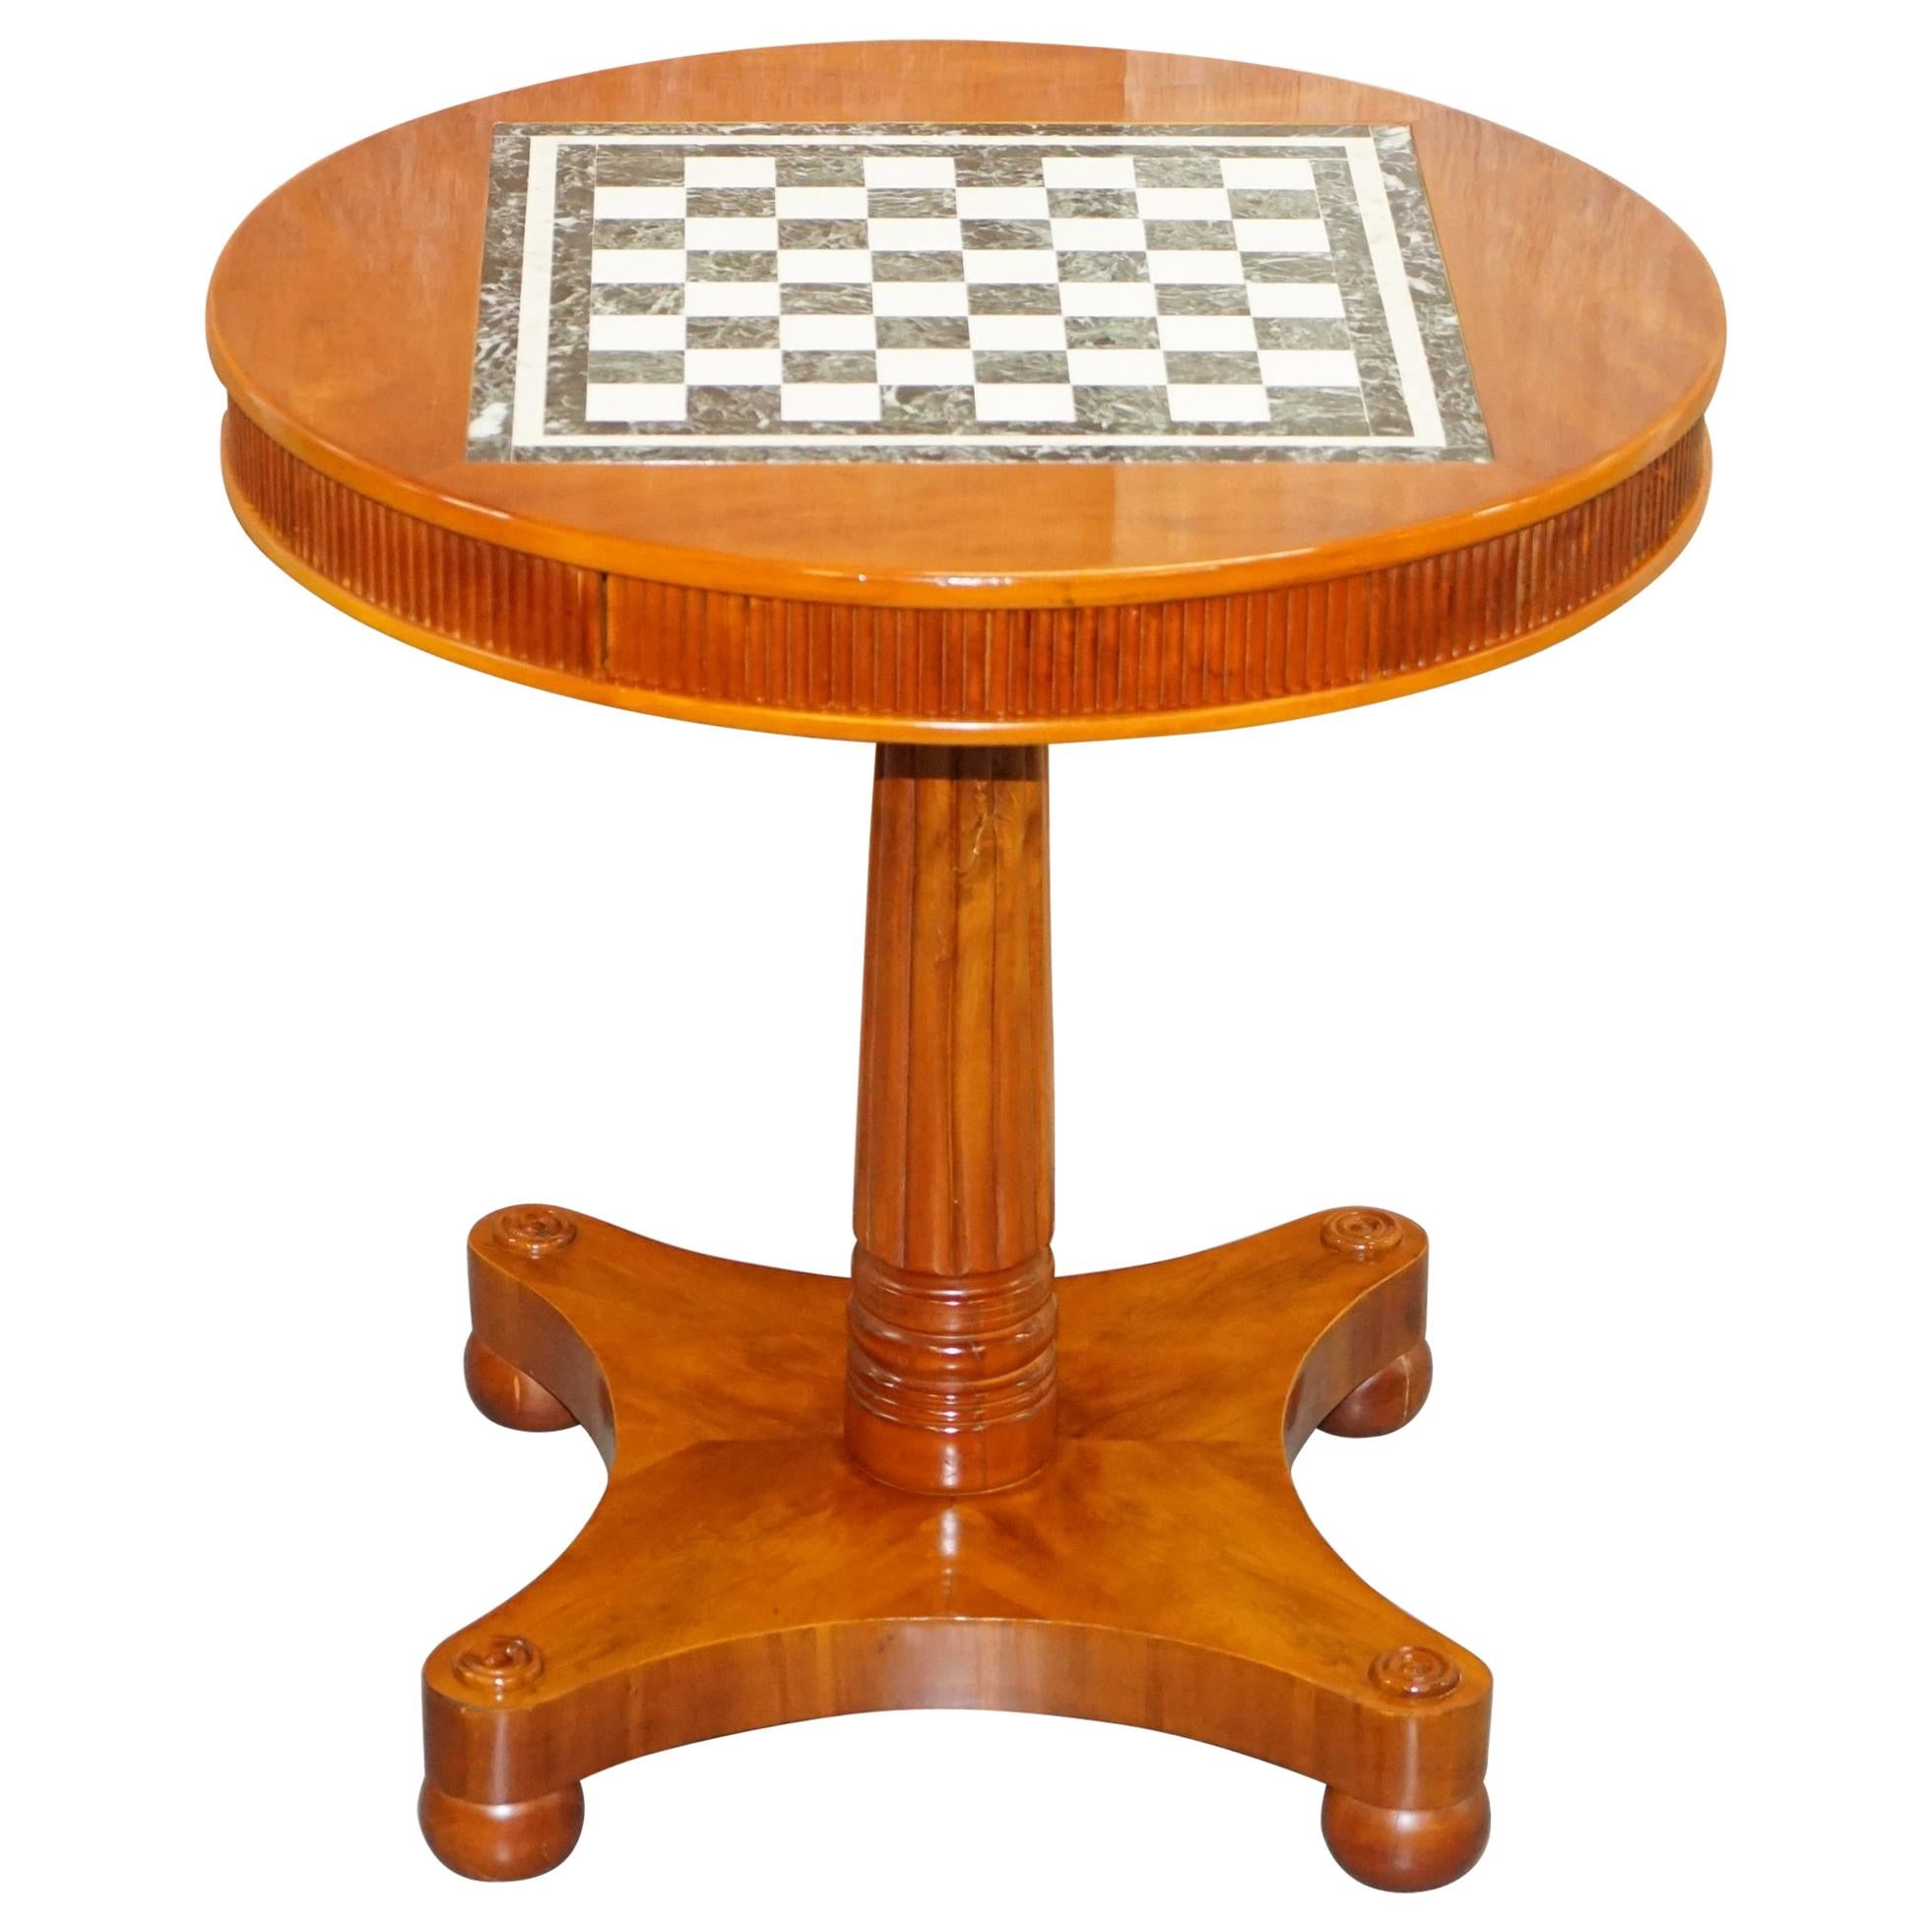 Vintage English Flamed Walnut Chess Table with Marble Inset Board Hidden Drawer